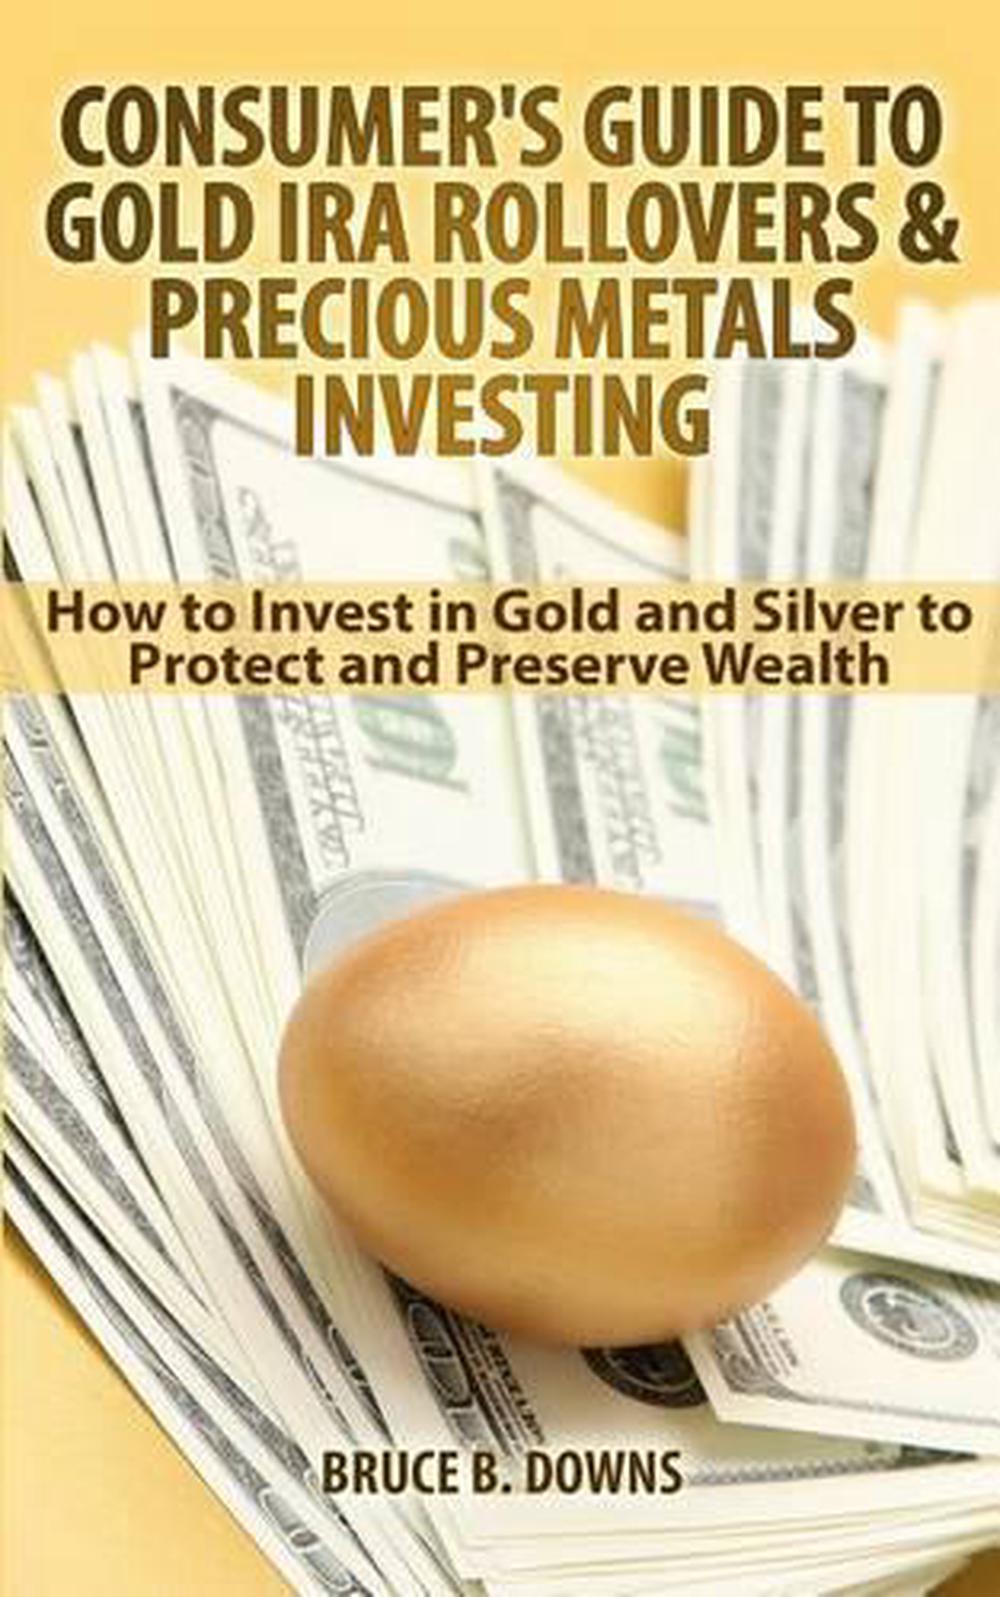 Consumer's Guide to Gold IRA Rollovers and Precious Metals Investing ...